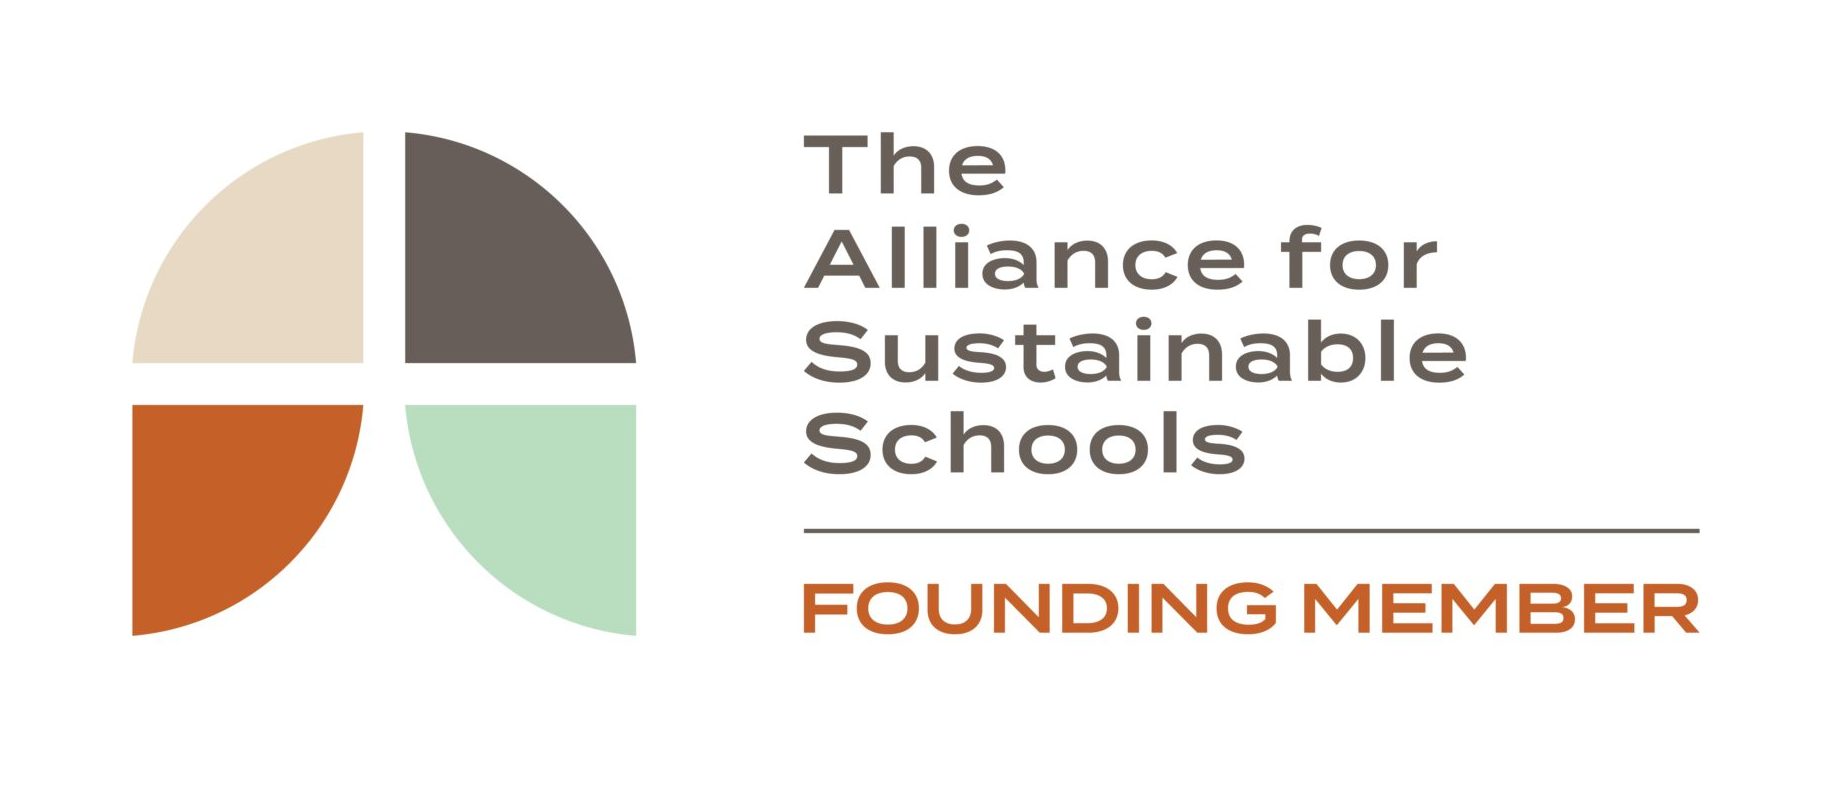 The Alliance for Sustainable Schools